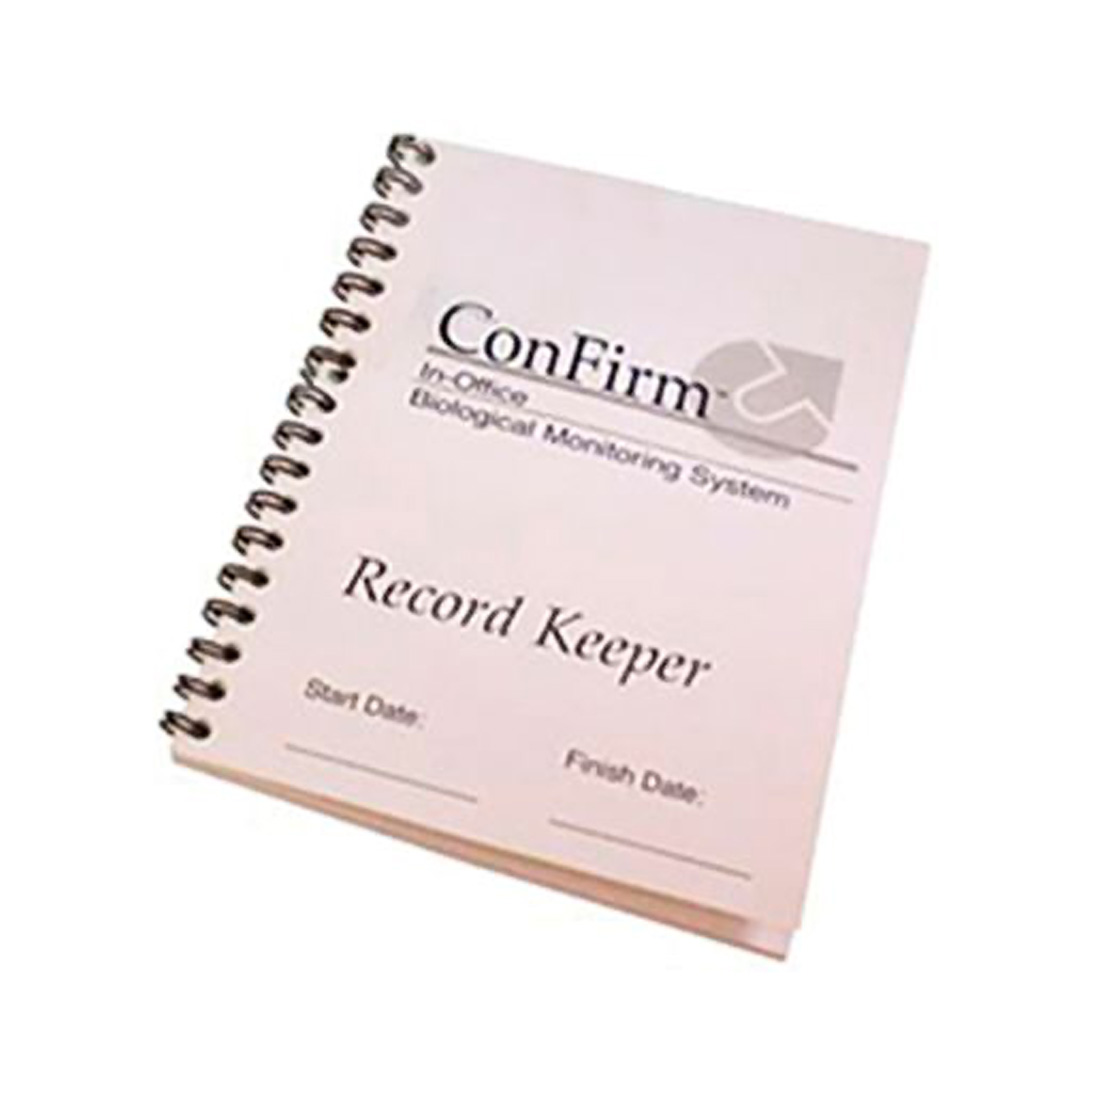 ConFirm® 10 In-Office Biological Monitoring System, Record Keeper Booklet